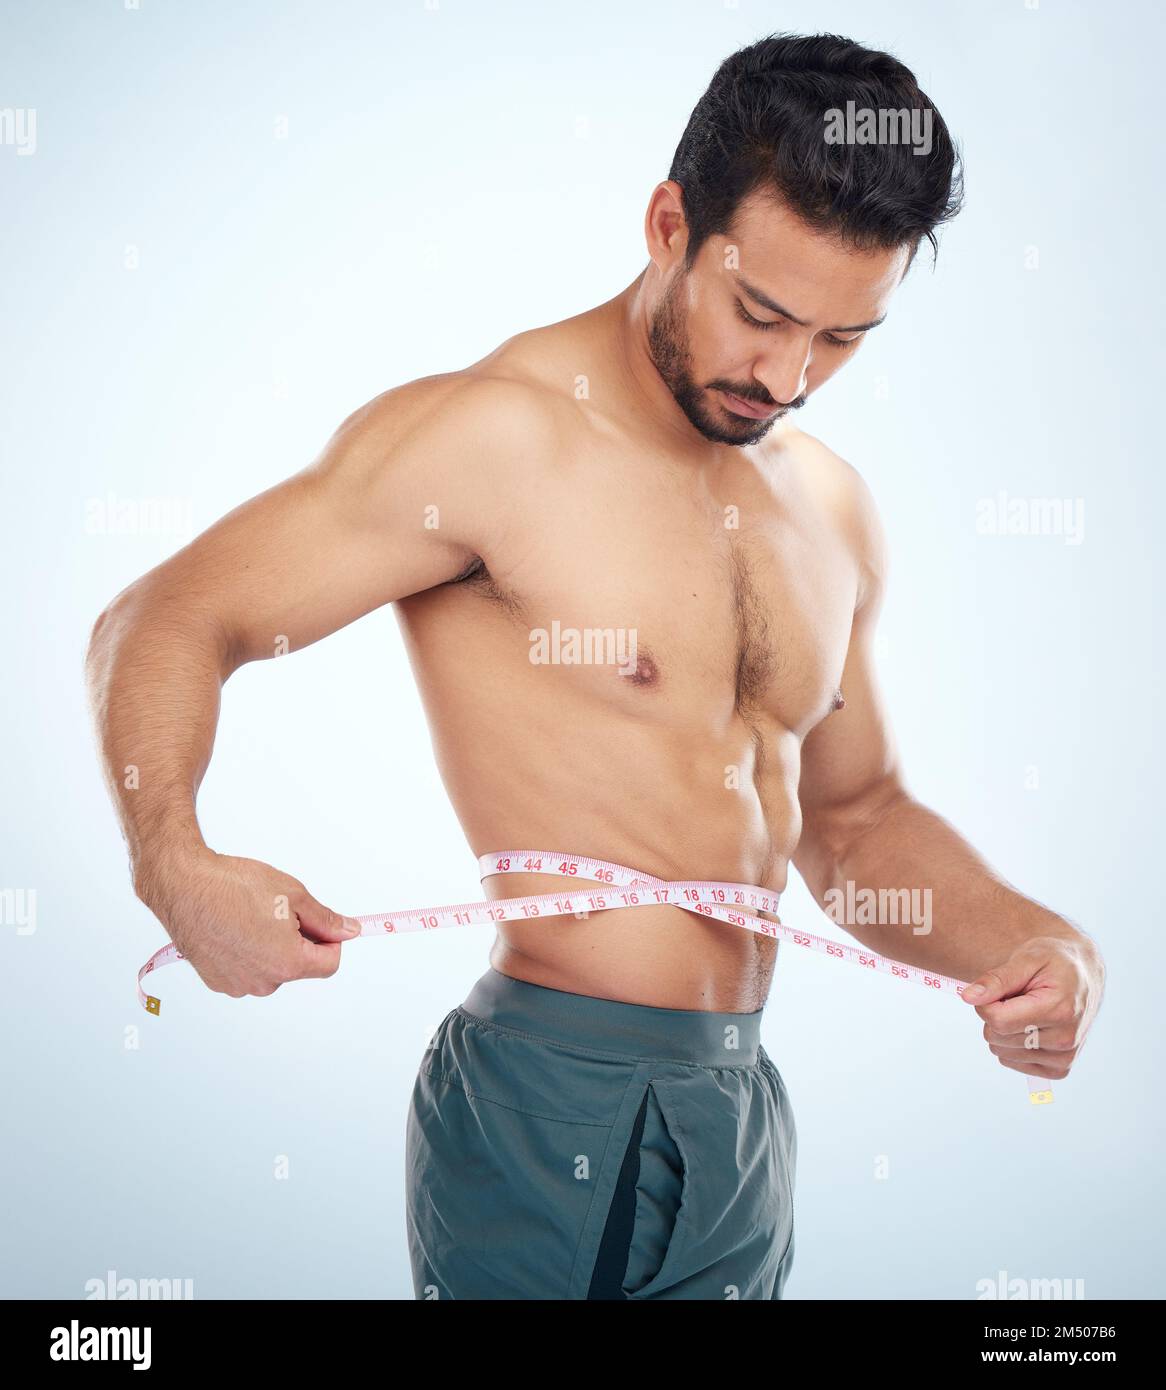 https://c8.alamy.com/comp/2M507B6/man-body-or-measuring-tape-on-waist-on-studio-background-for-weight-loss-management-fat-control-or-bmi-and-diet-wellness-fitness-model-sports-2M507B6.jpg